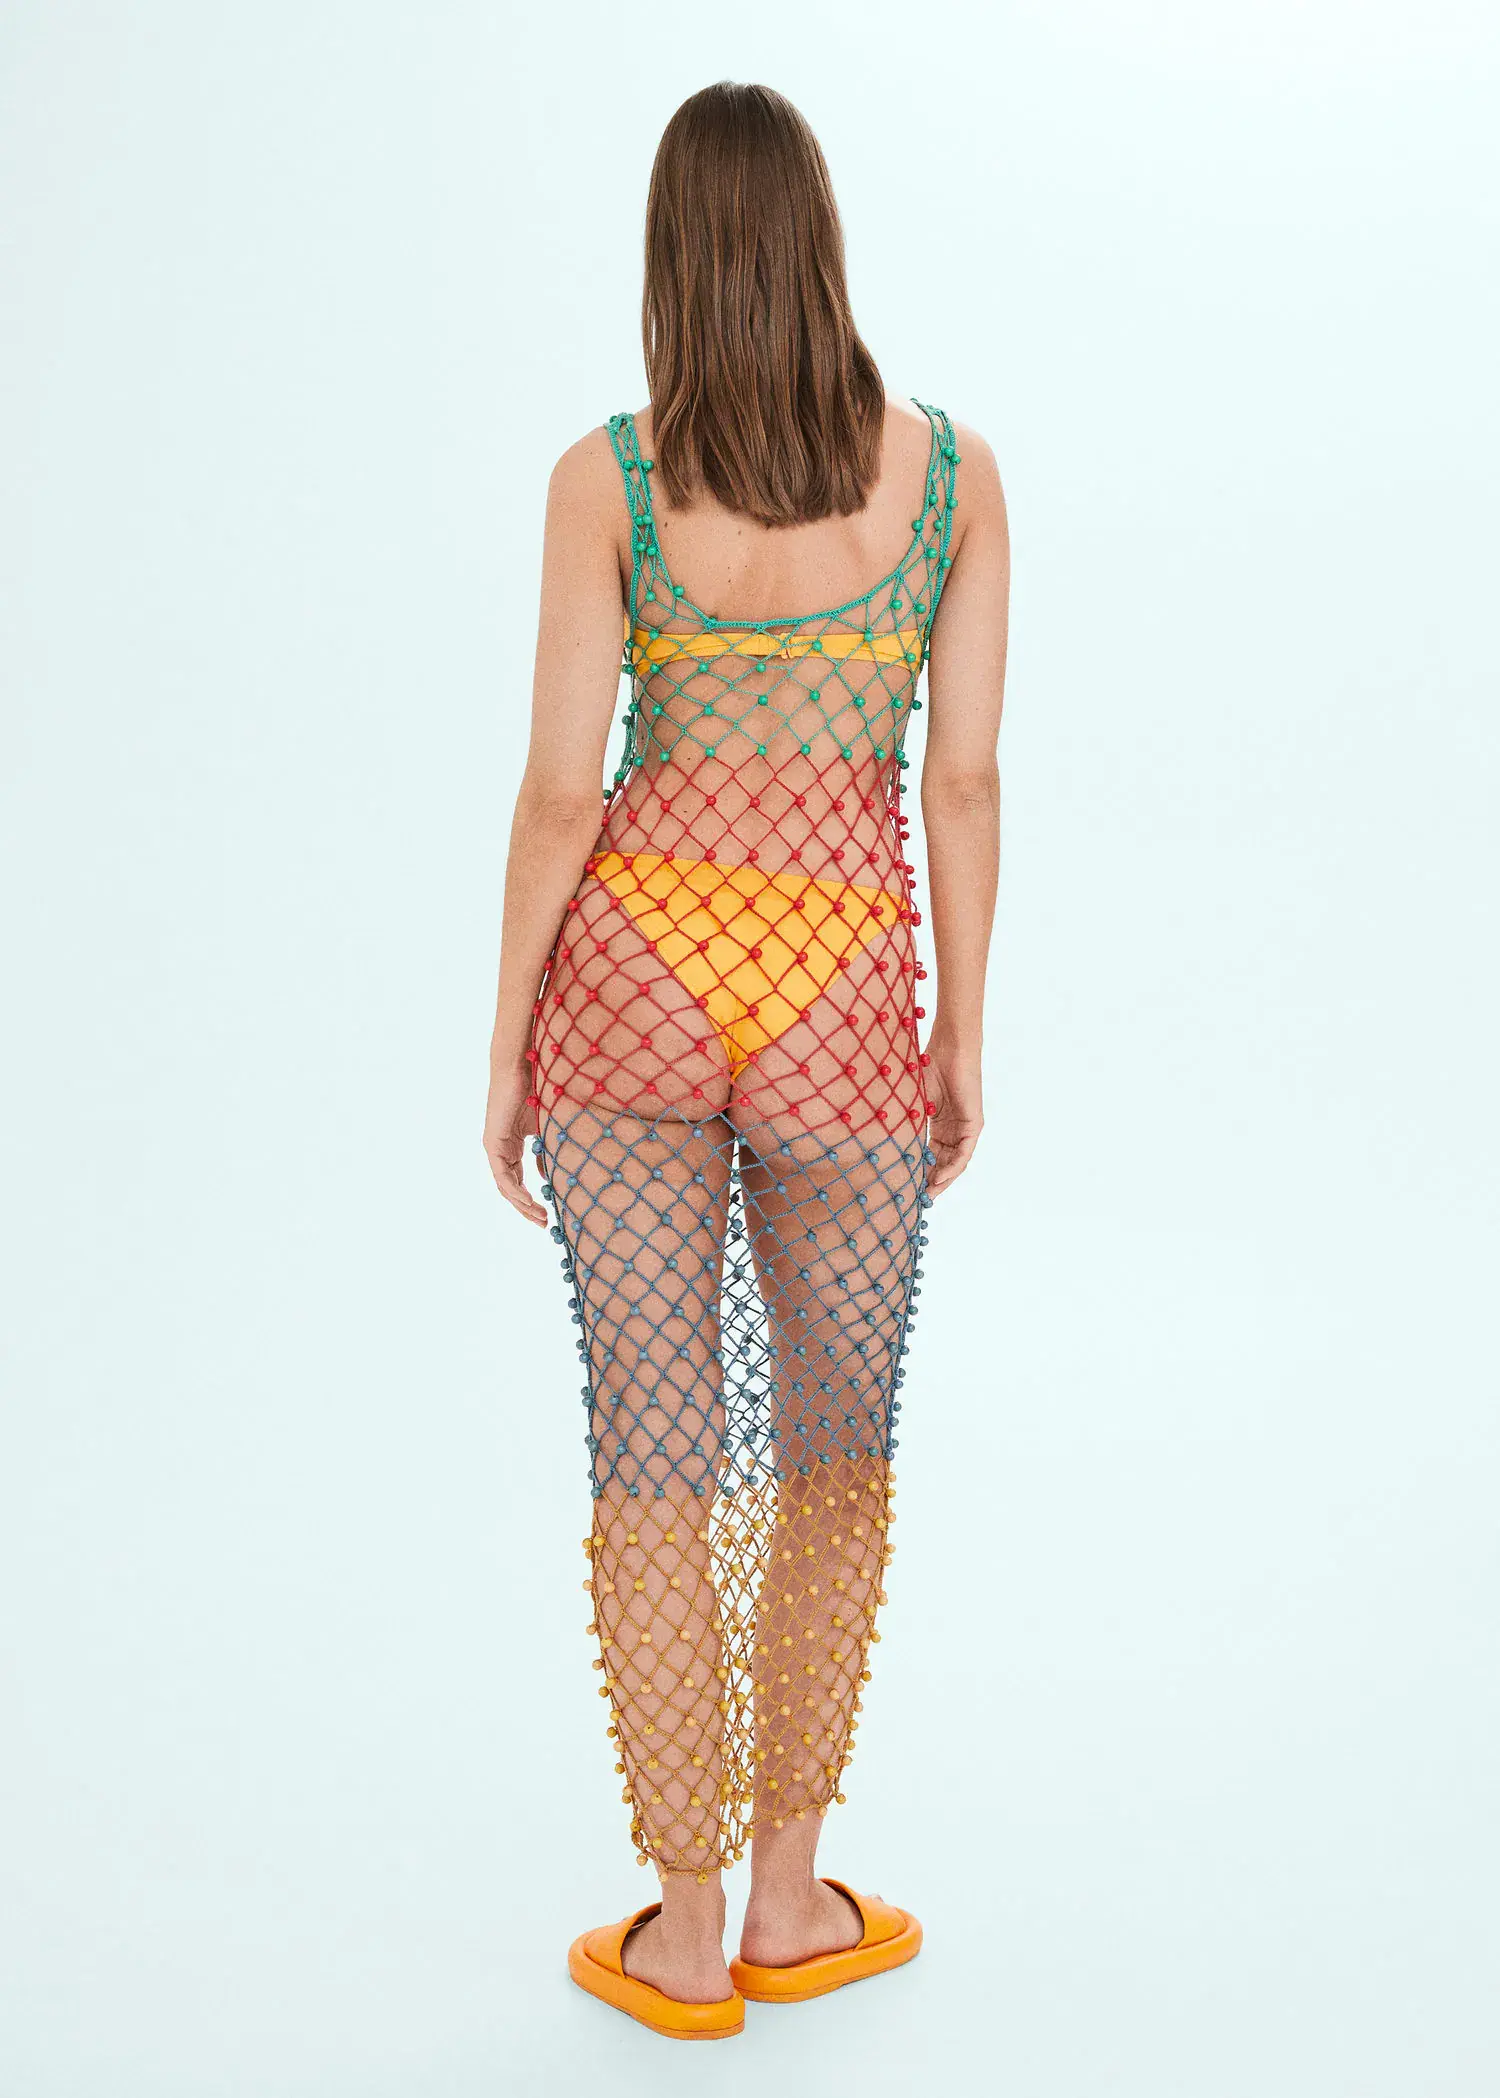 Mango Multi-coloured net dress with beads. a woman wearing a colorful fishnet outfit. 